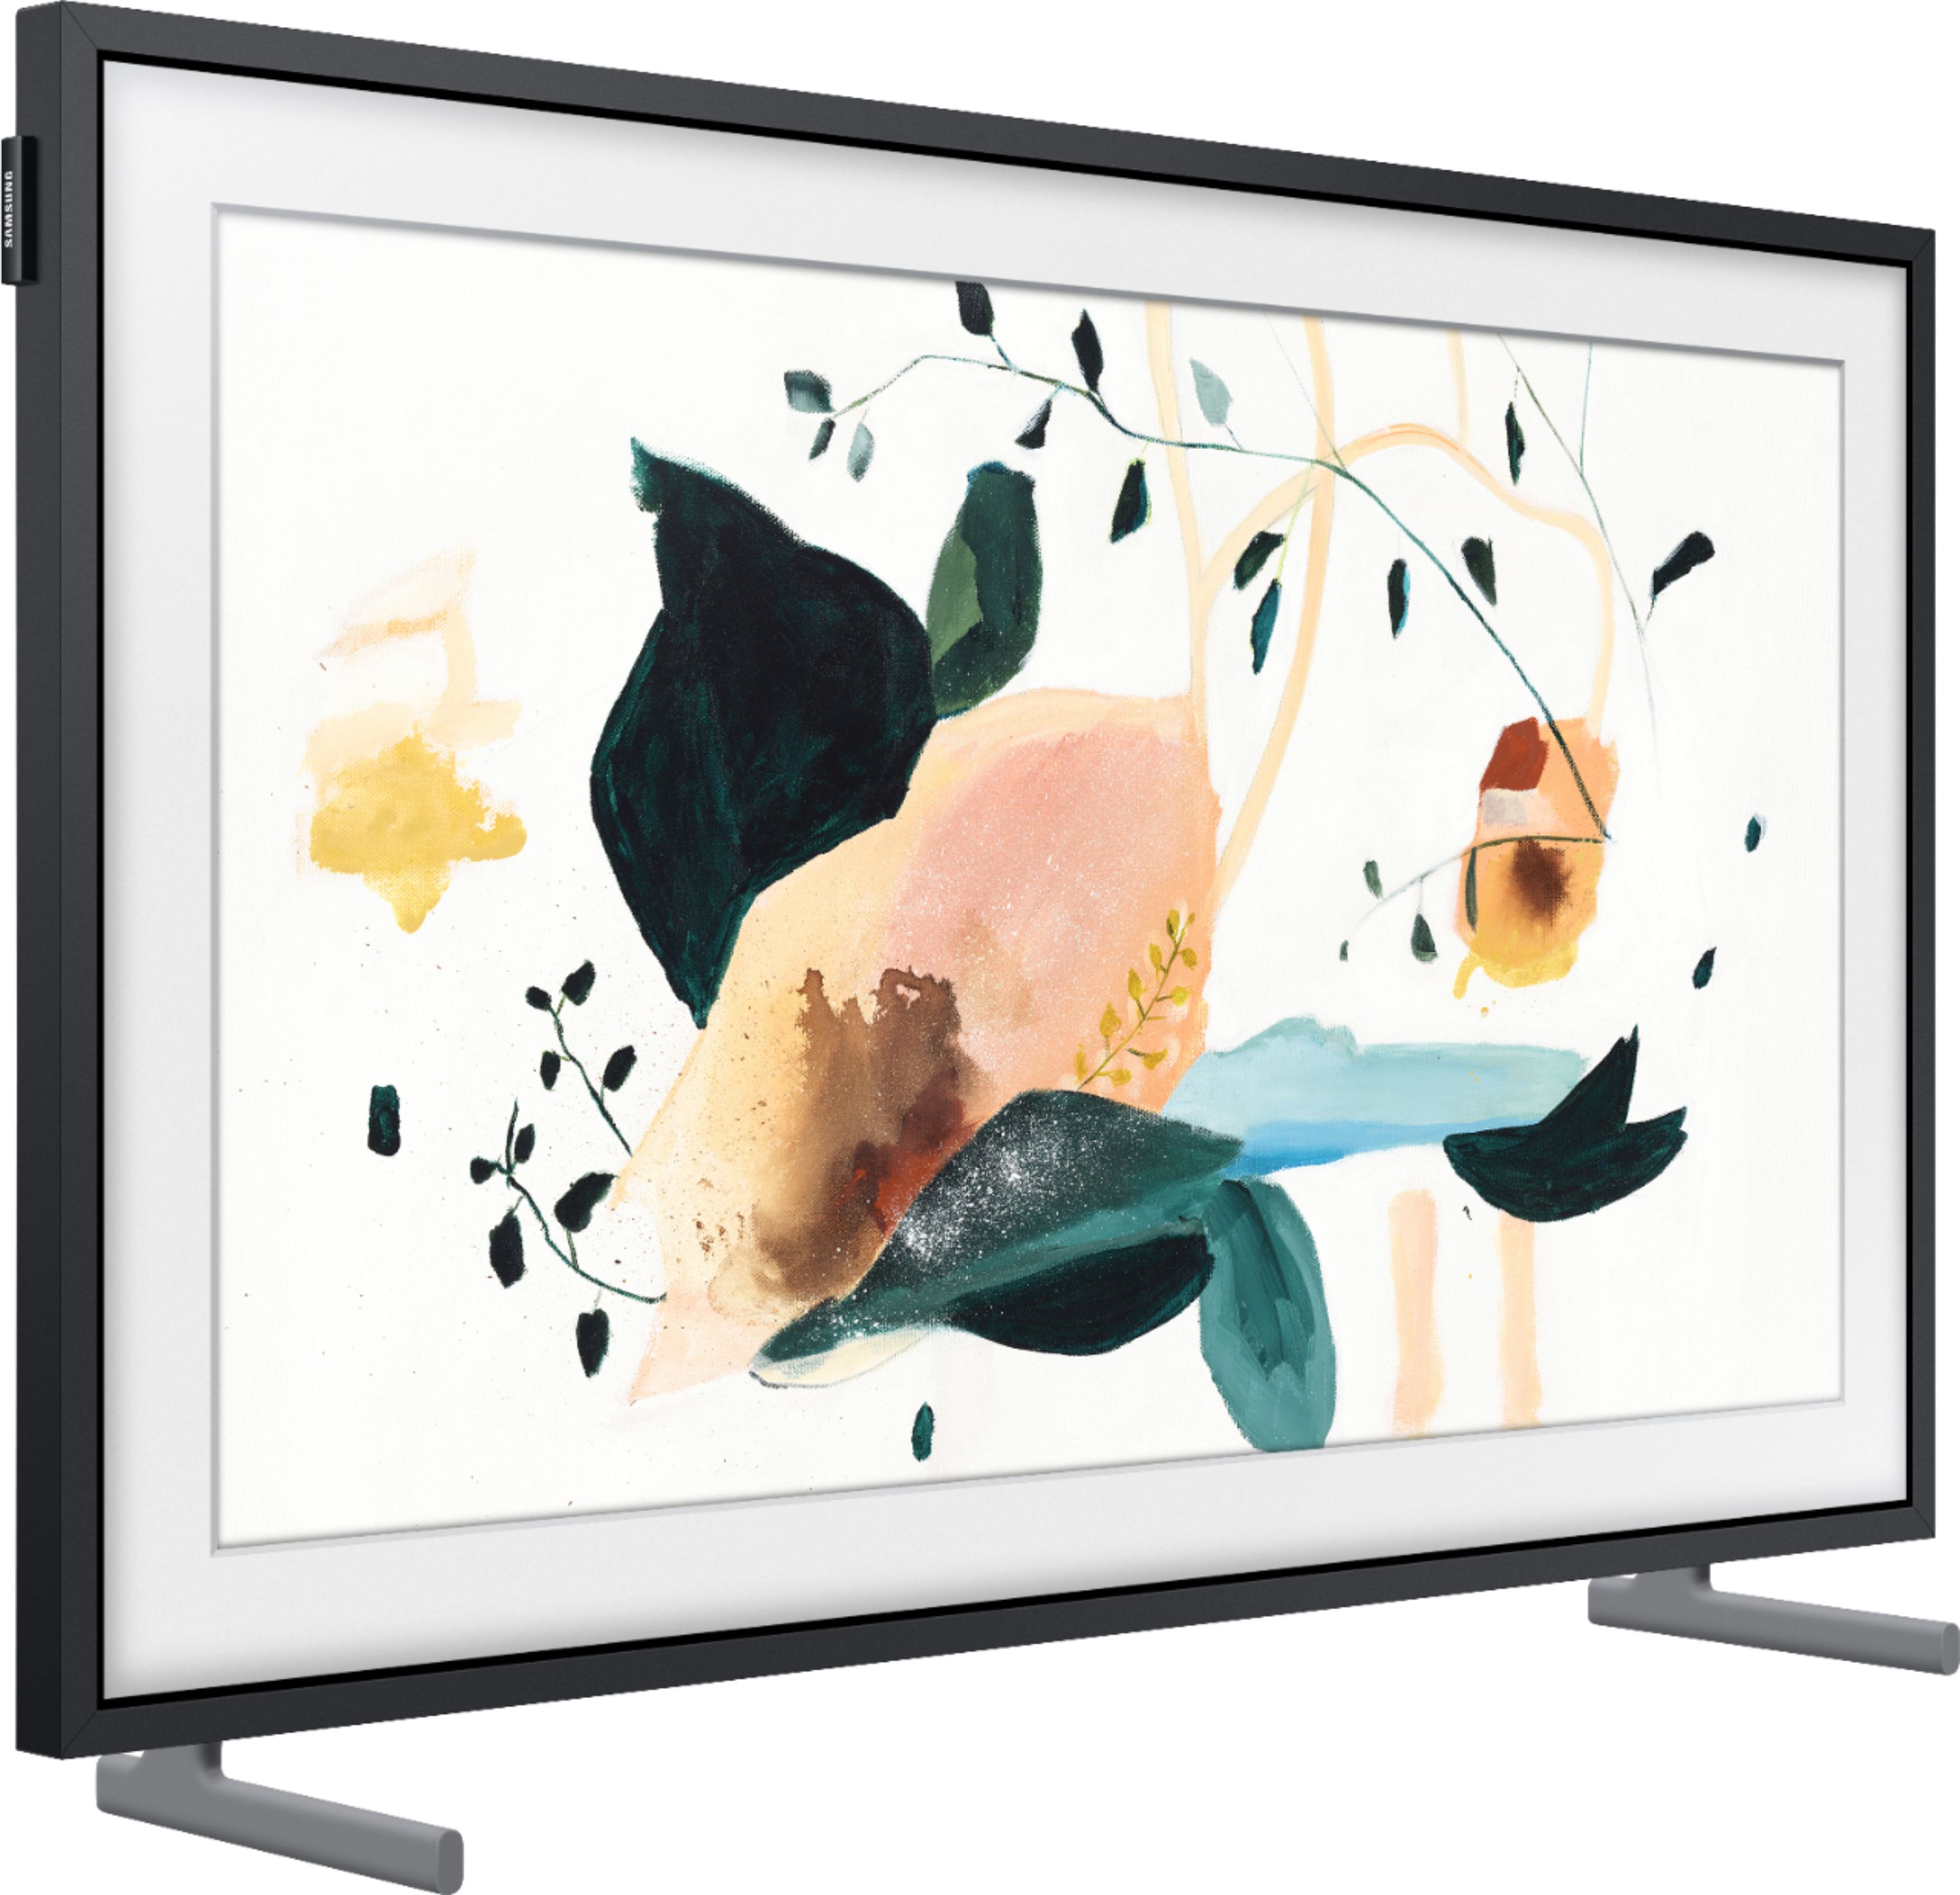 Angle View: Samsung - 32" Class The Frame QLED Full HD Smart Tizen TV